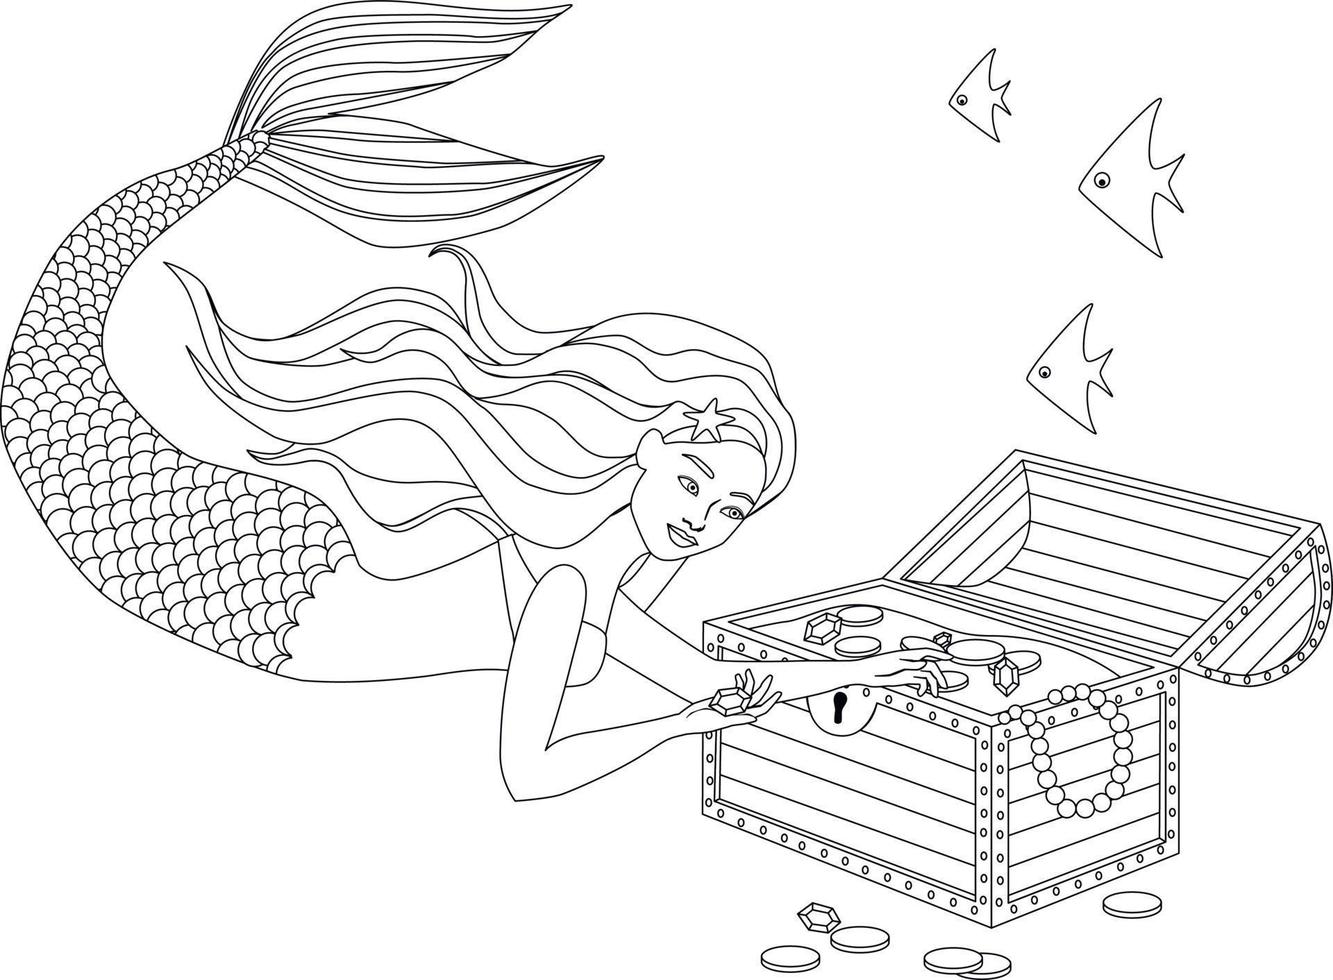 Mermaid and underwater treasure. Black and white vector illustration for coloring book